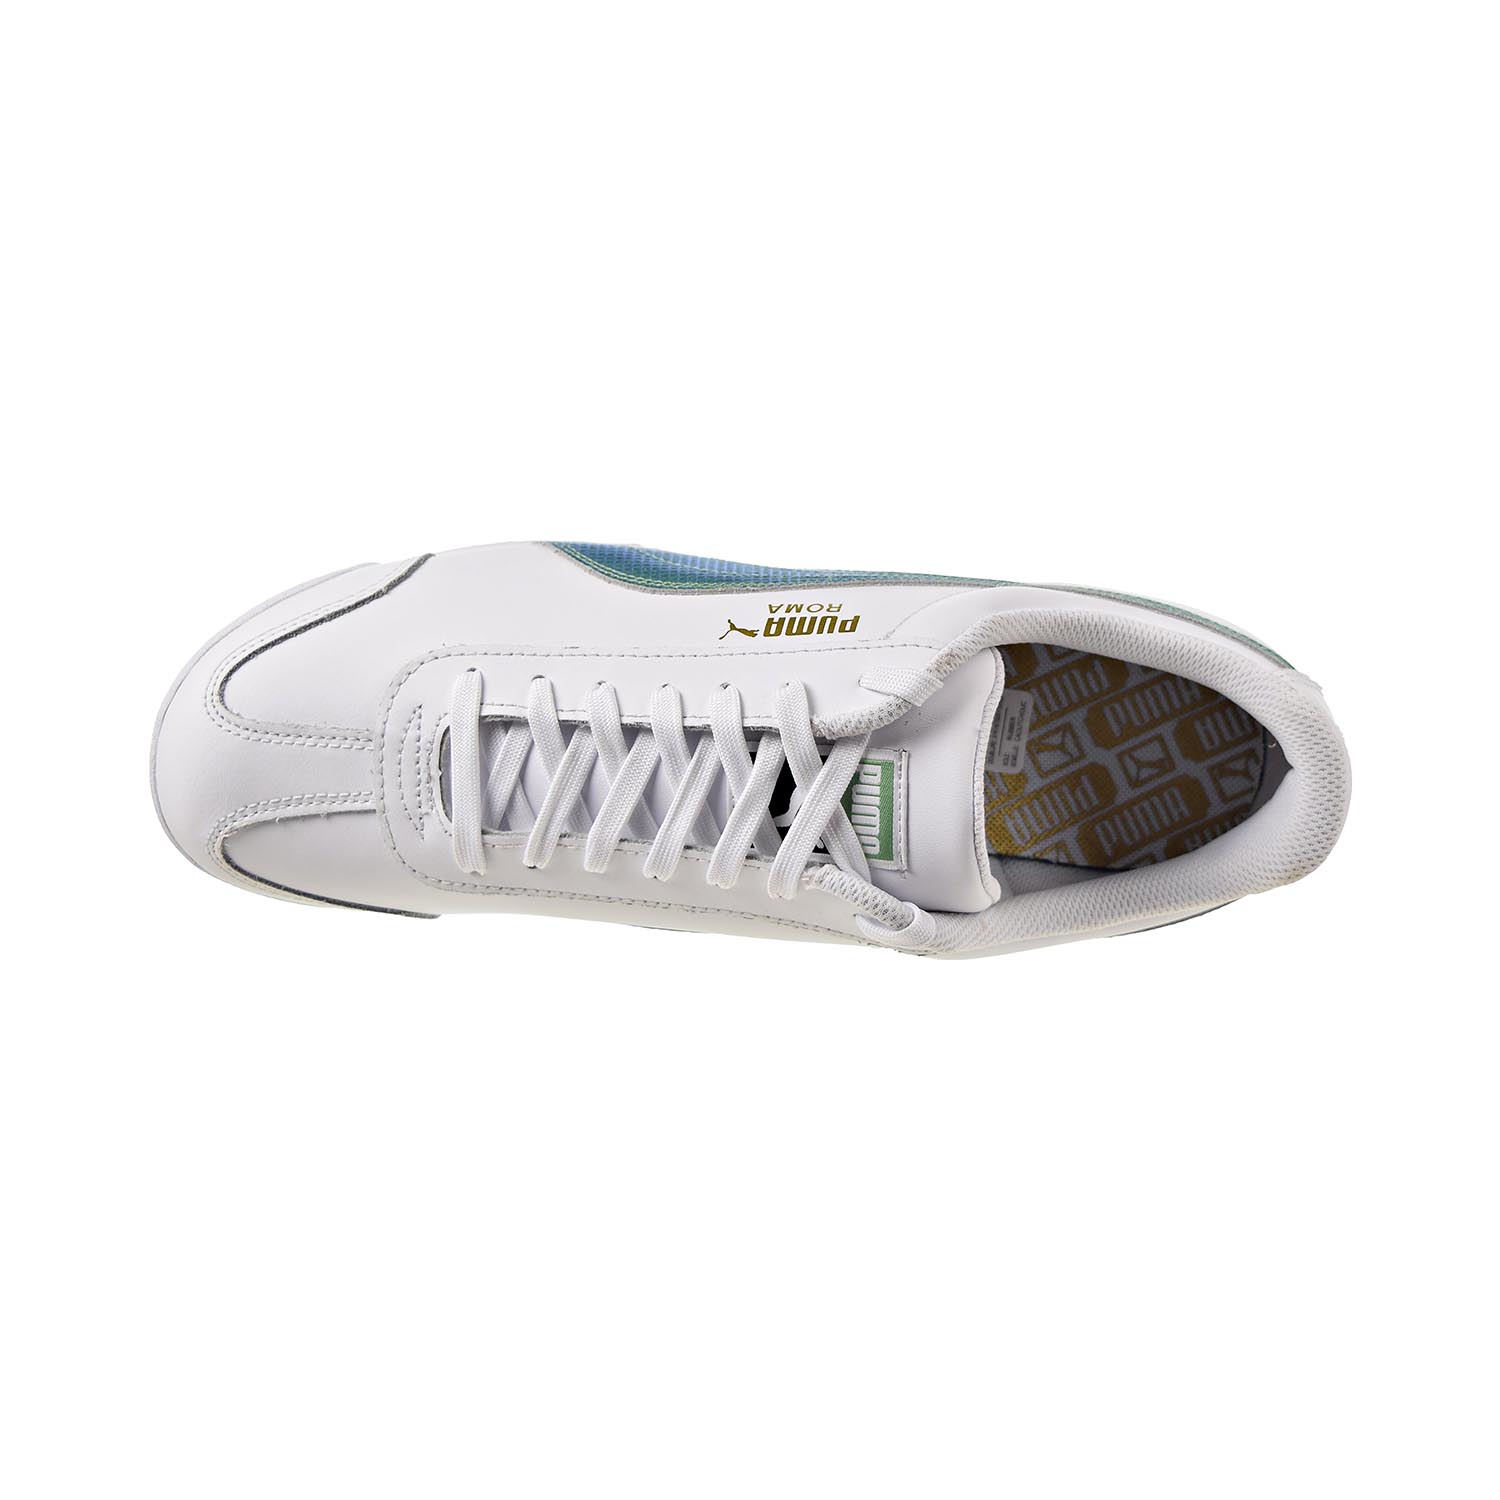 Puma Men's Roma Basic Holo White / Green Gecko Ankle-High Leather Fashion Sneaker - 11.5M - image 5 of 6